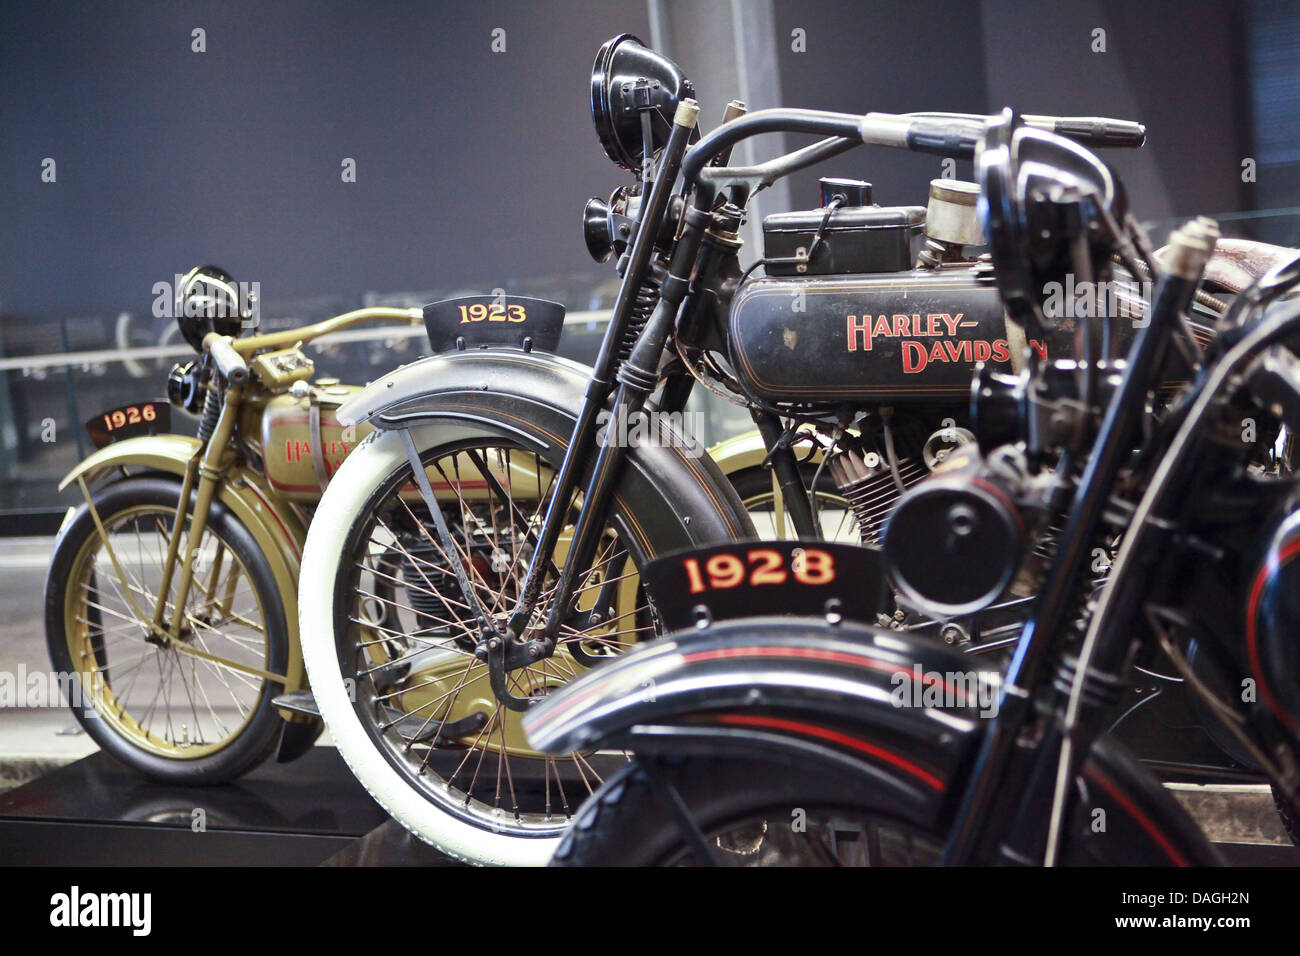 Vintage Harley-Davidson motorcycles are seen on display at the Harley-Davidson museum in Milwaukee Stock Photo